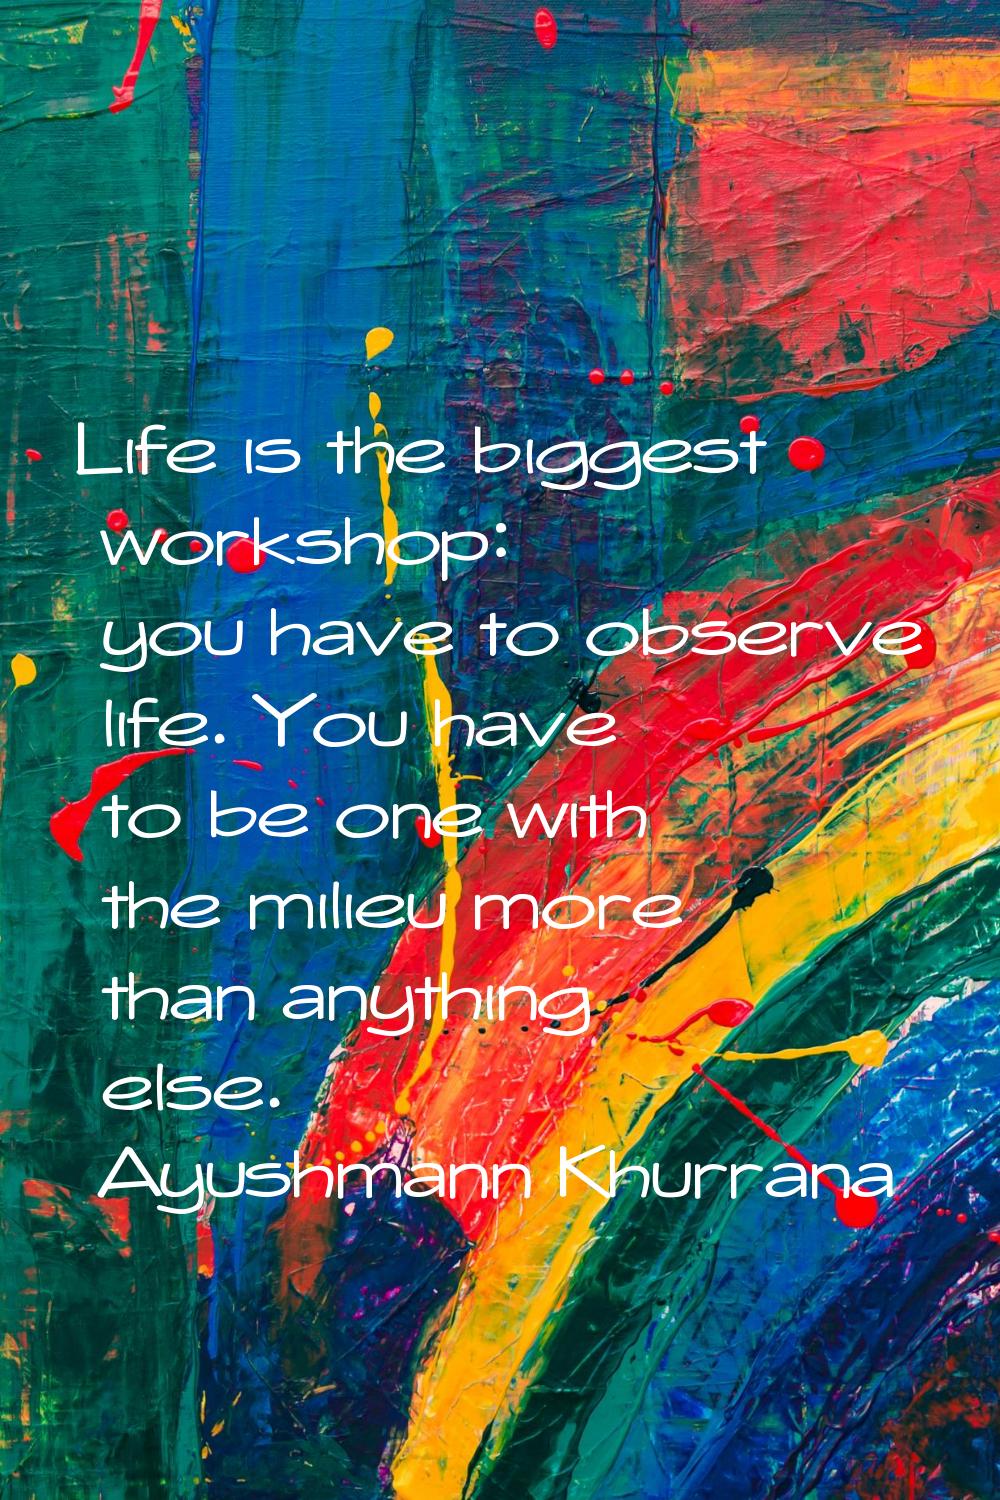 Life is the biggest workshop: you have to observe life. You have to be one with the milieu more tha